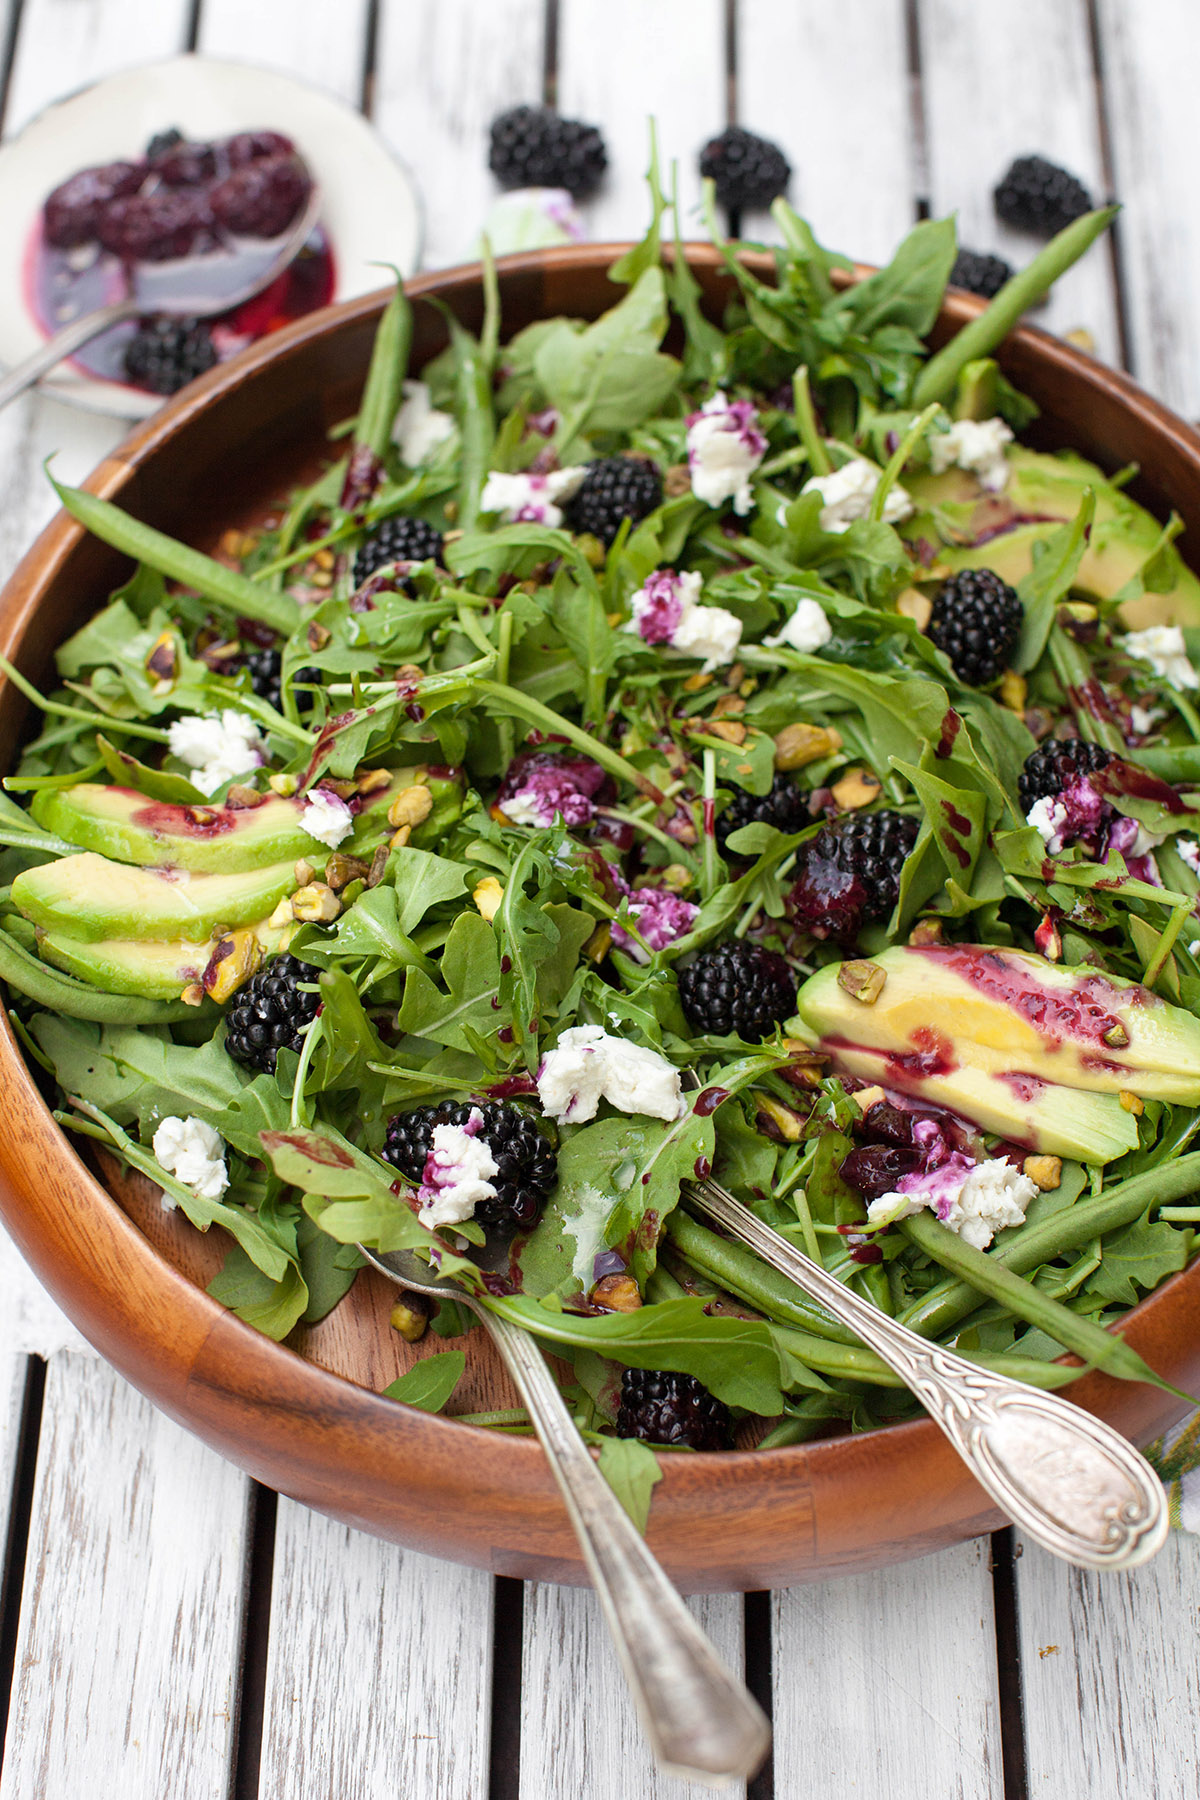 Avocado and Blackberry Salad with Grilled Blackberry Dressing